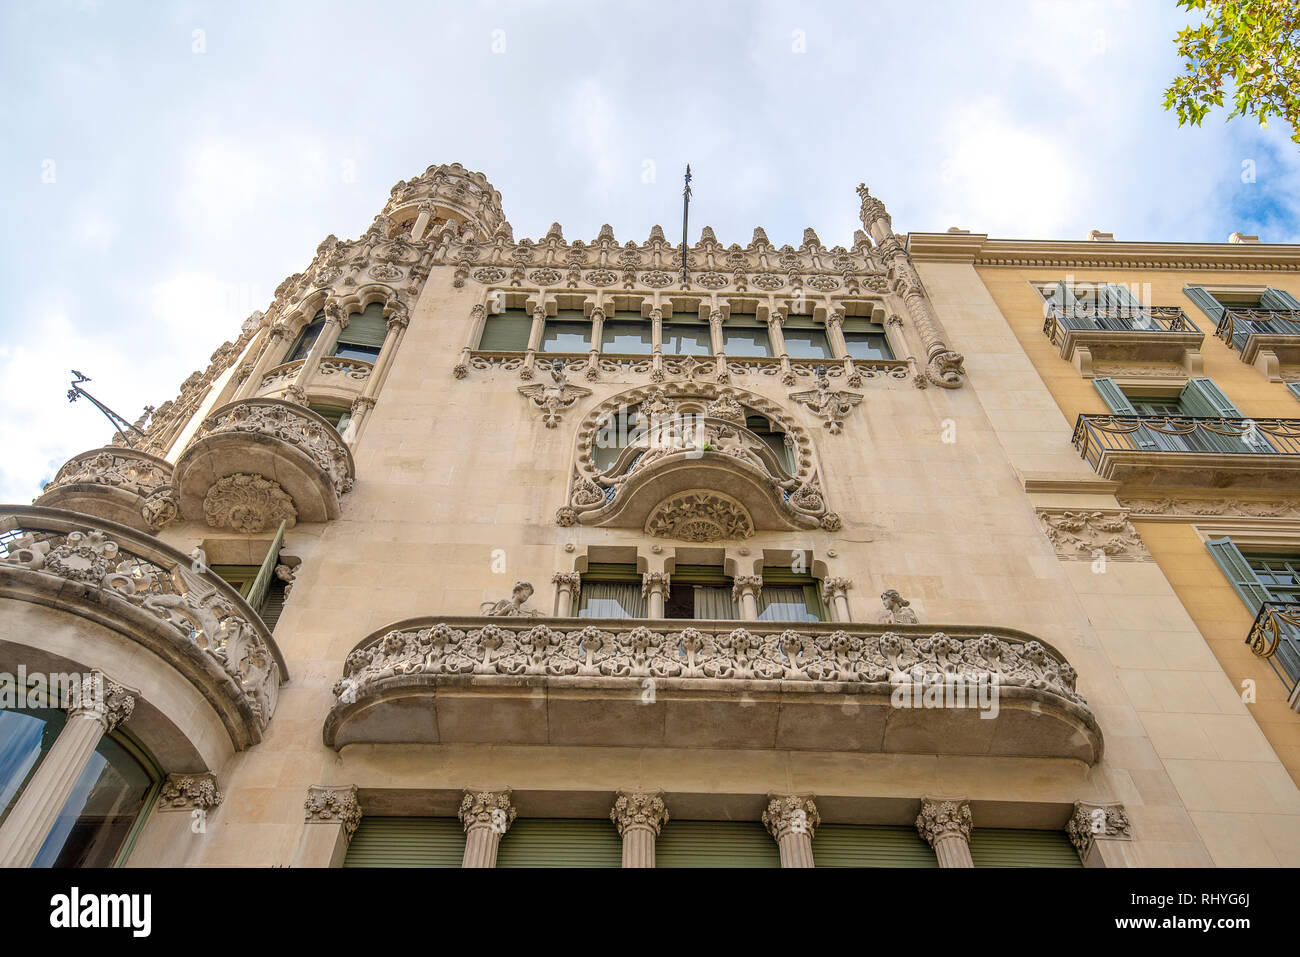 The Casa Lleo Morera is a building designed by noted modernisme Catalan architect Domenech i Montaner in BARCELONA, Spain Stock Photo